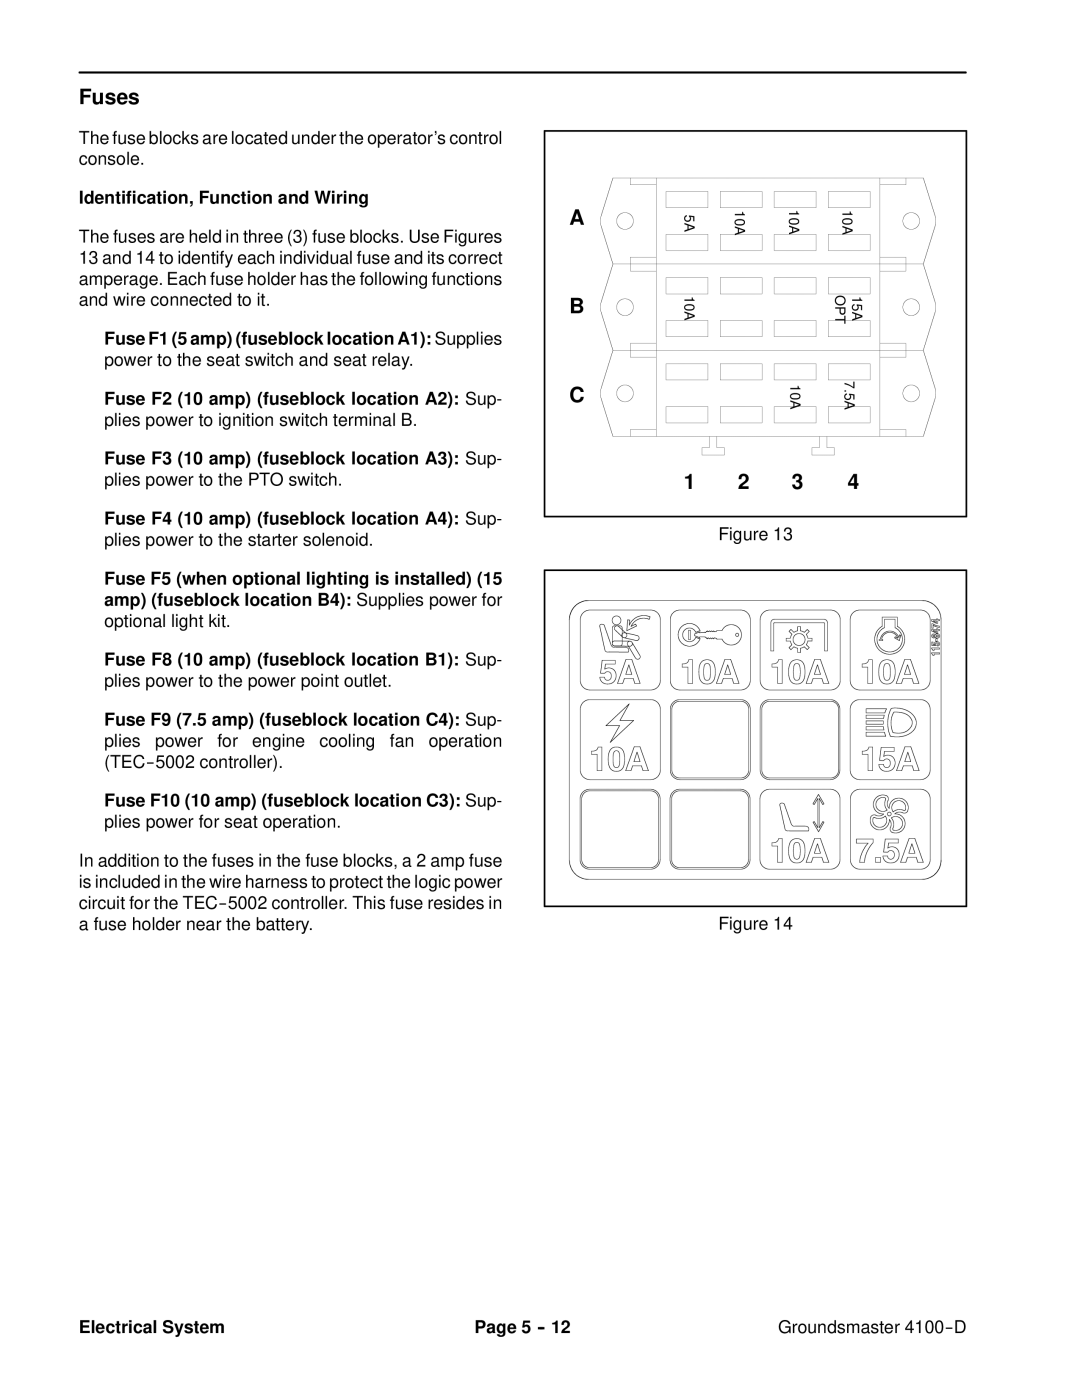 Toro 4100-D service manual Fuses, Identification, Function and Wiring 